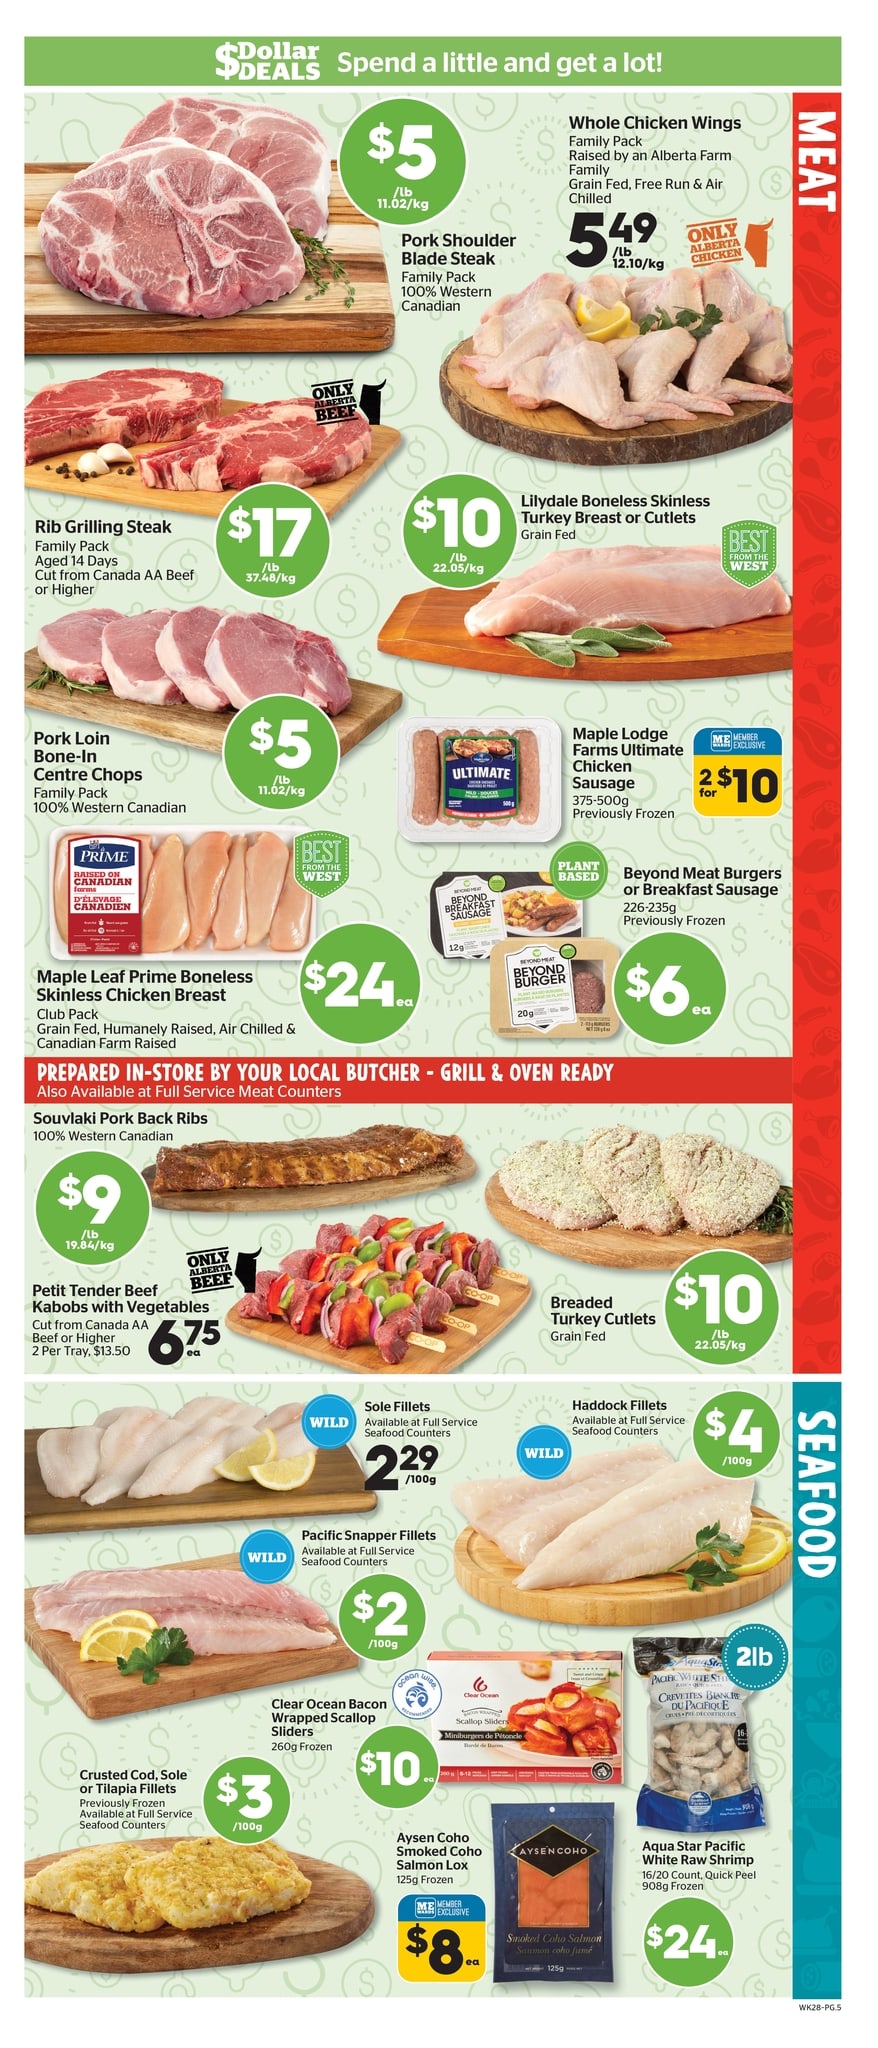 Calgary Co-op - Weekly Flyer Specials - Page 6